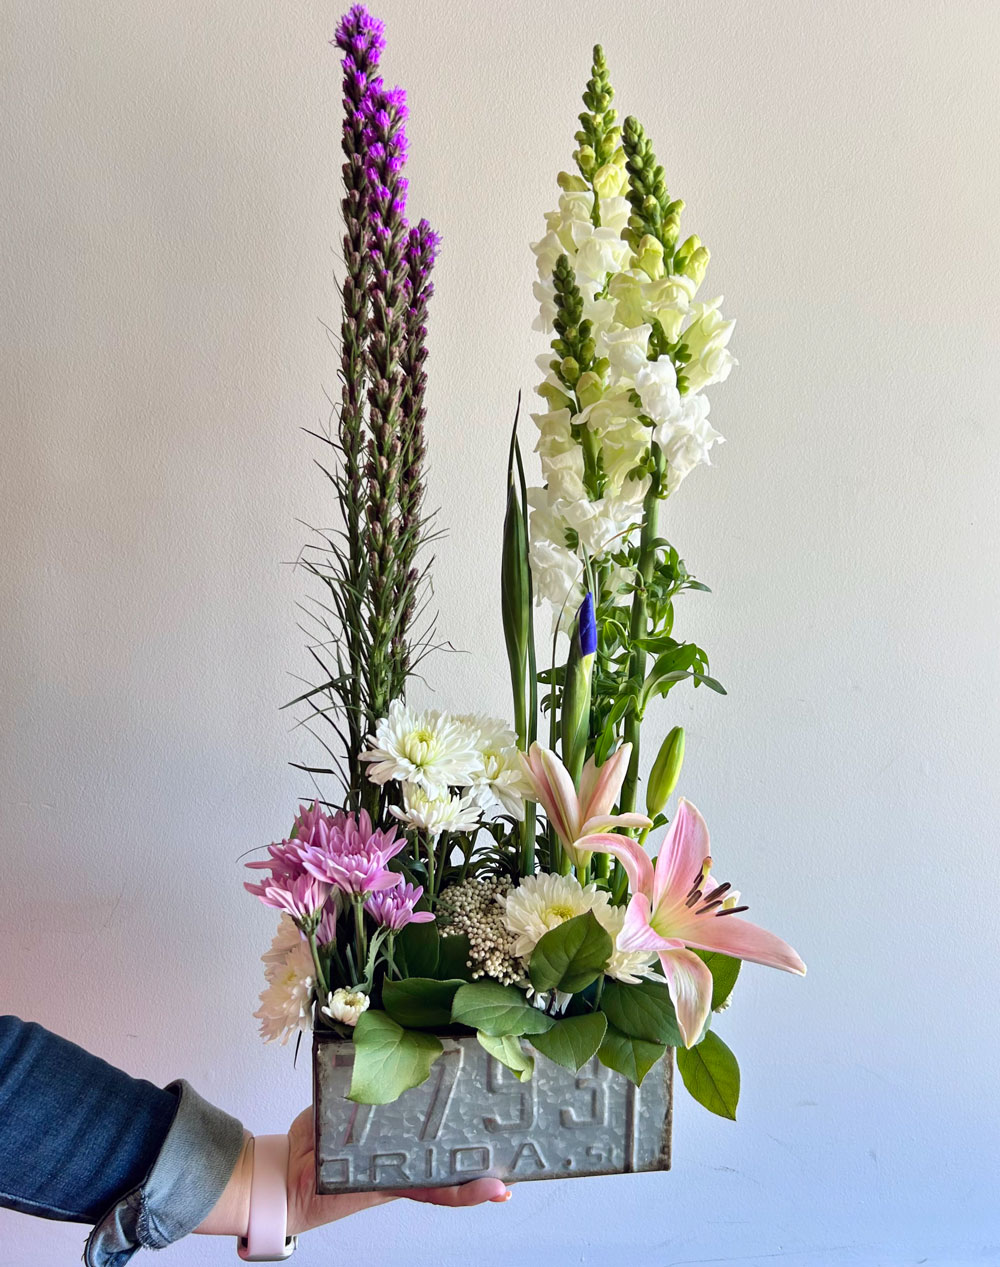 Liatris, Snap Dragons, Daisies, Lilies for Mother's Day